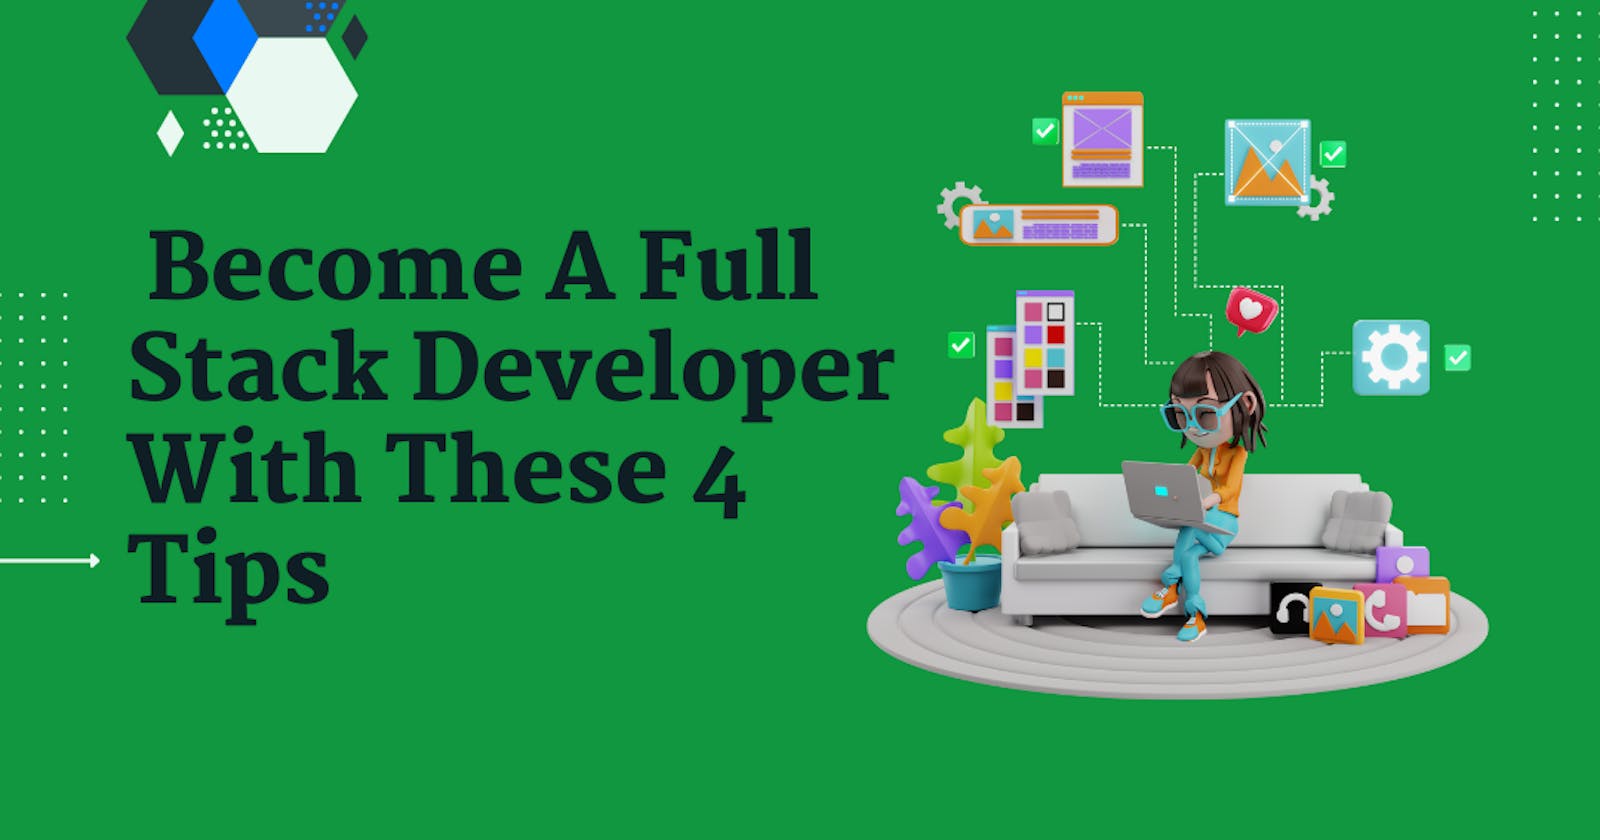 Lost In The Sea Of Full Stack Developer Courses?
Here Are 4 Tips To Help You In Becoming A Full Stack Developer!